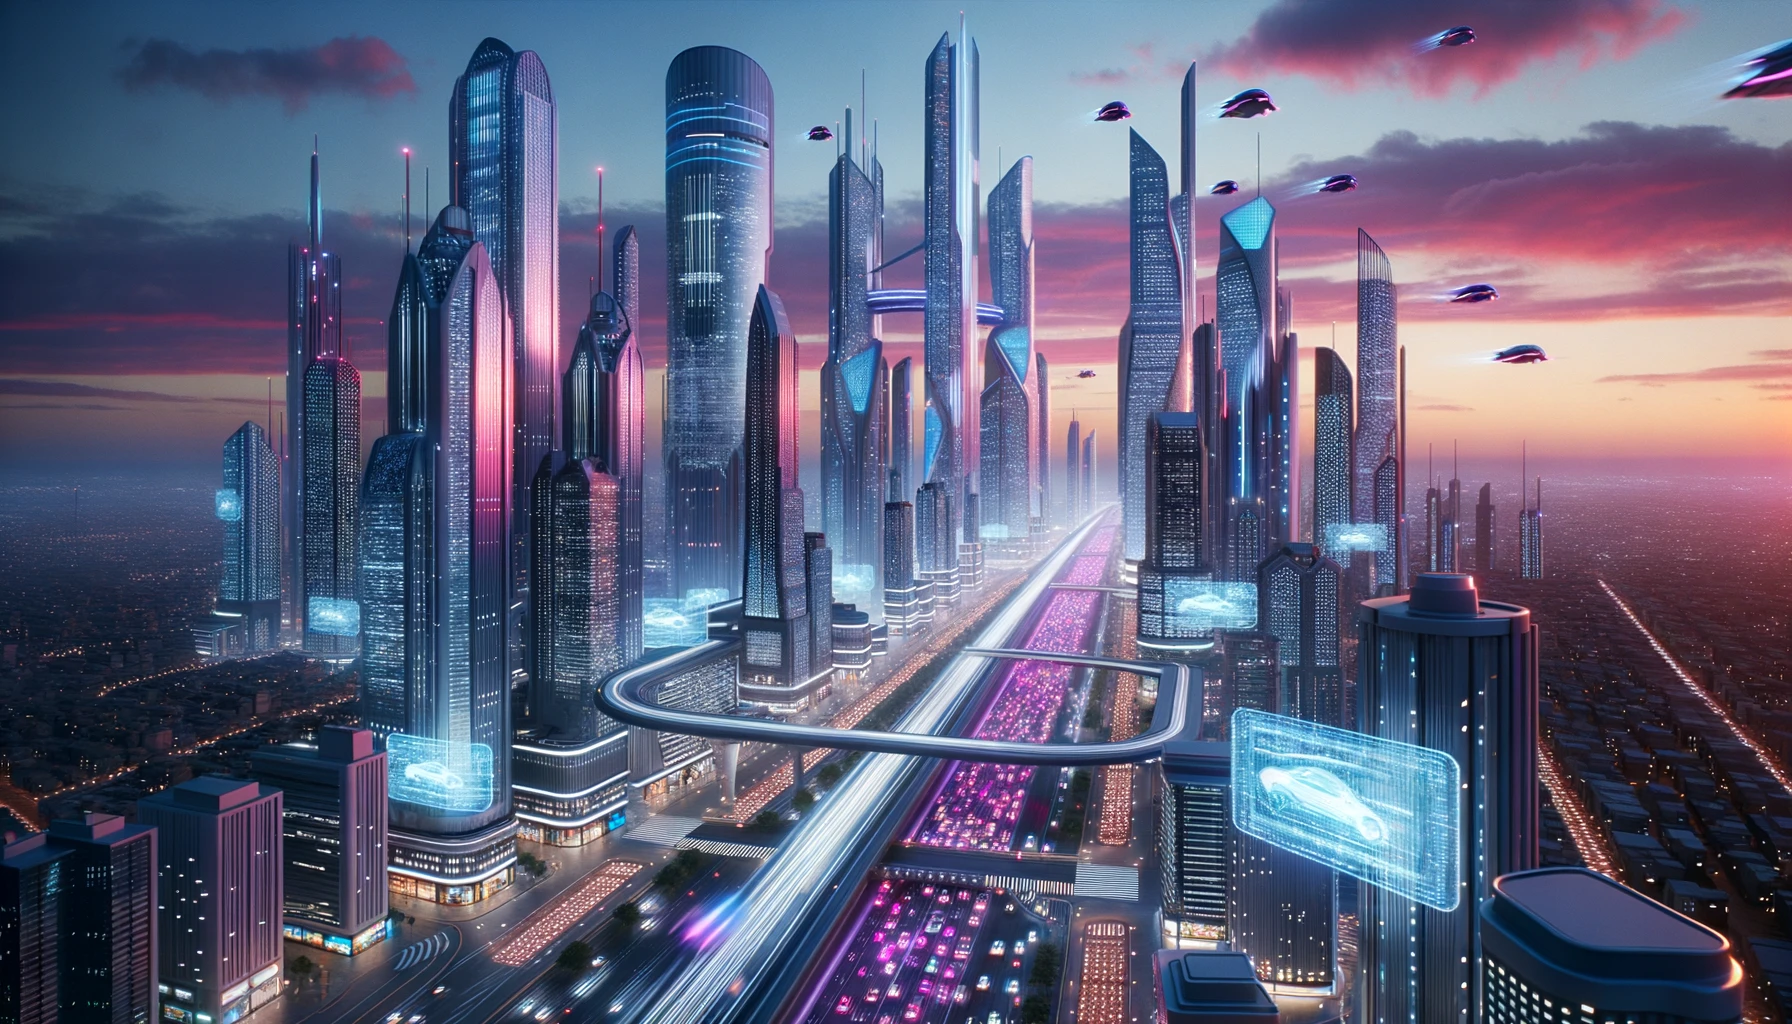 Render of a metropolis in a future setting. The evening sky is painted with shades of pink and indigo. Skyscrapers, built with advanced materials like chrome, reach for the heavens. Traffic is not just limited to the ground; flying cars traverse the airspace, their lights creating dynamic patterns. Adding to the ambiance, holographic displays showcase various advertisements, making the city feel alive and vibrant.